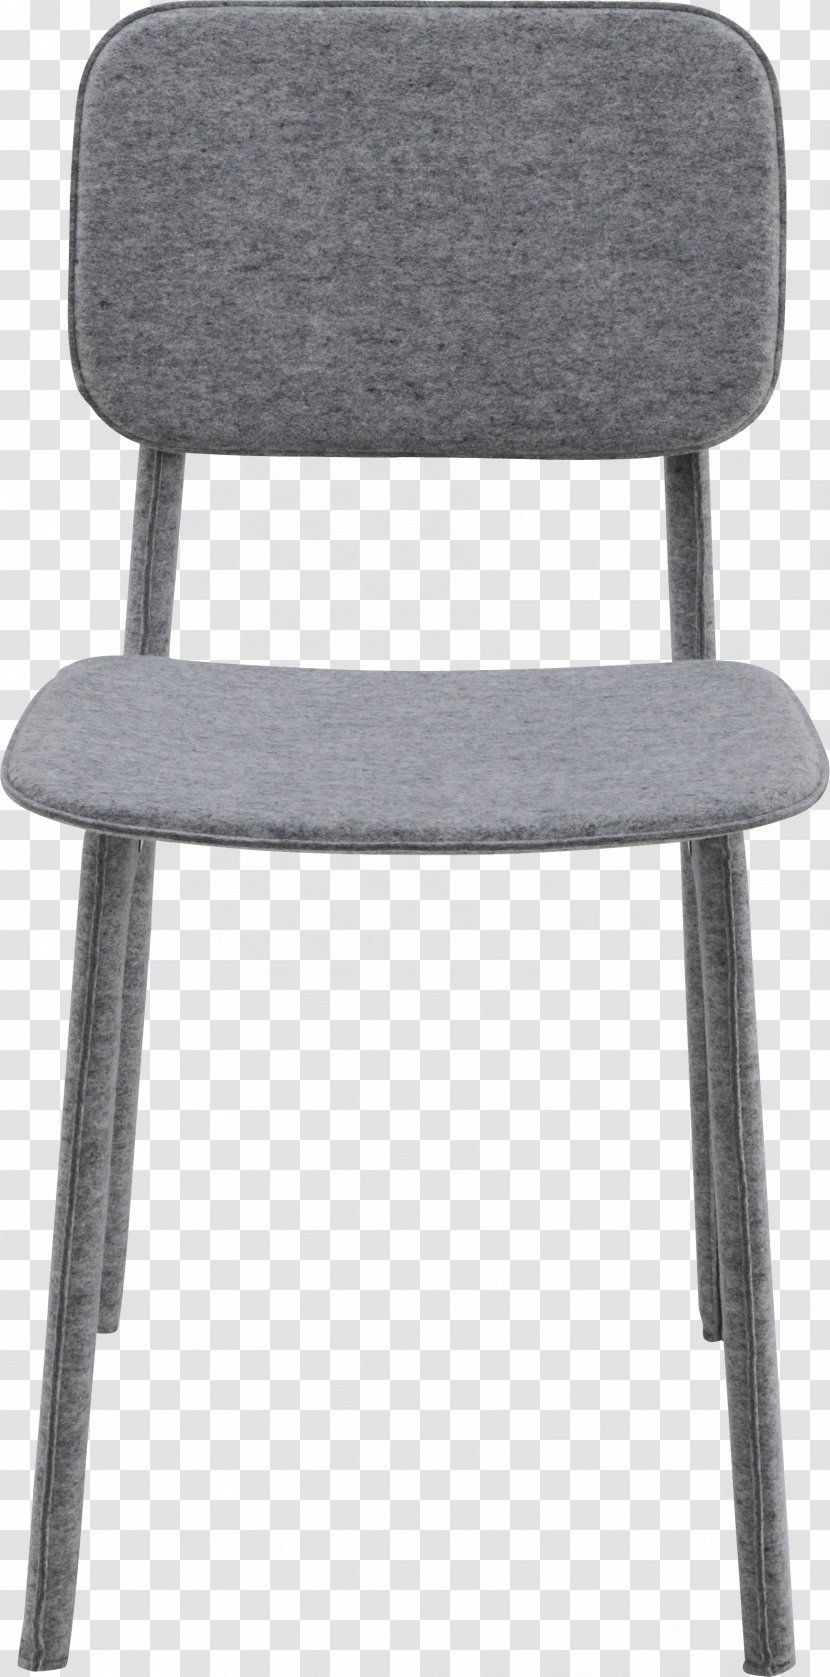 Chair Icon - Furniture - Image Transparent PNG